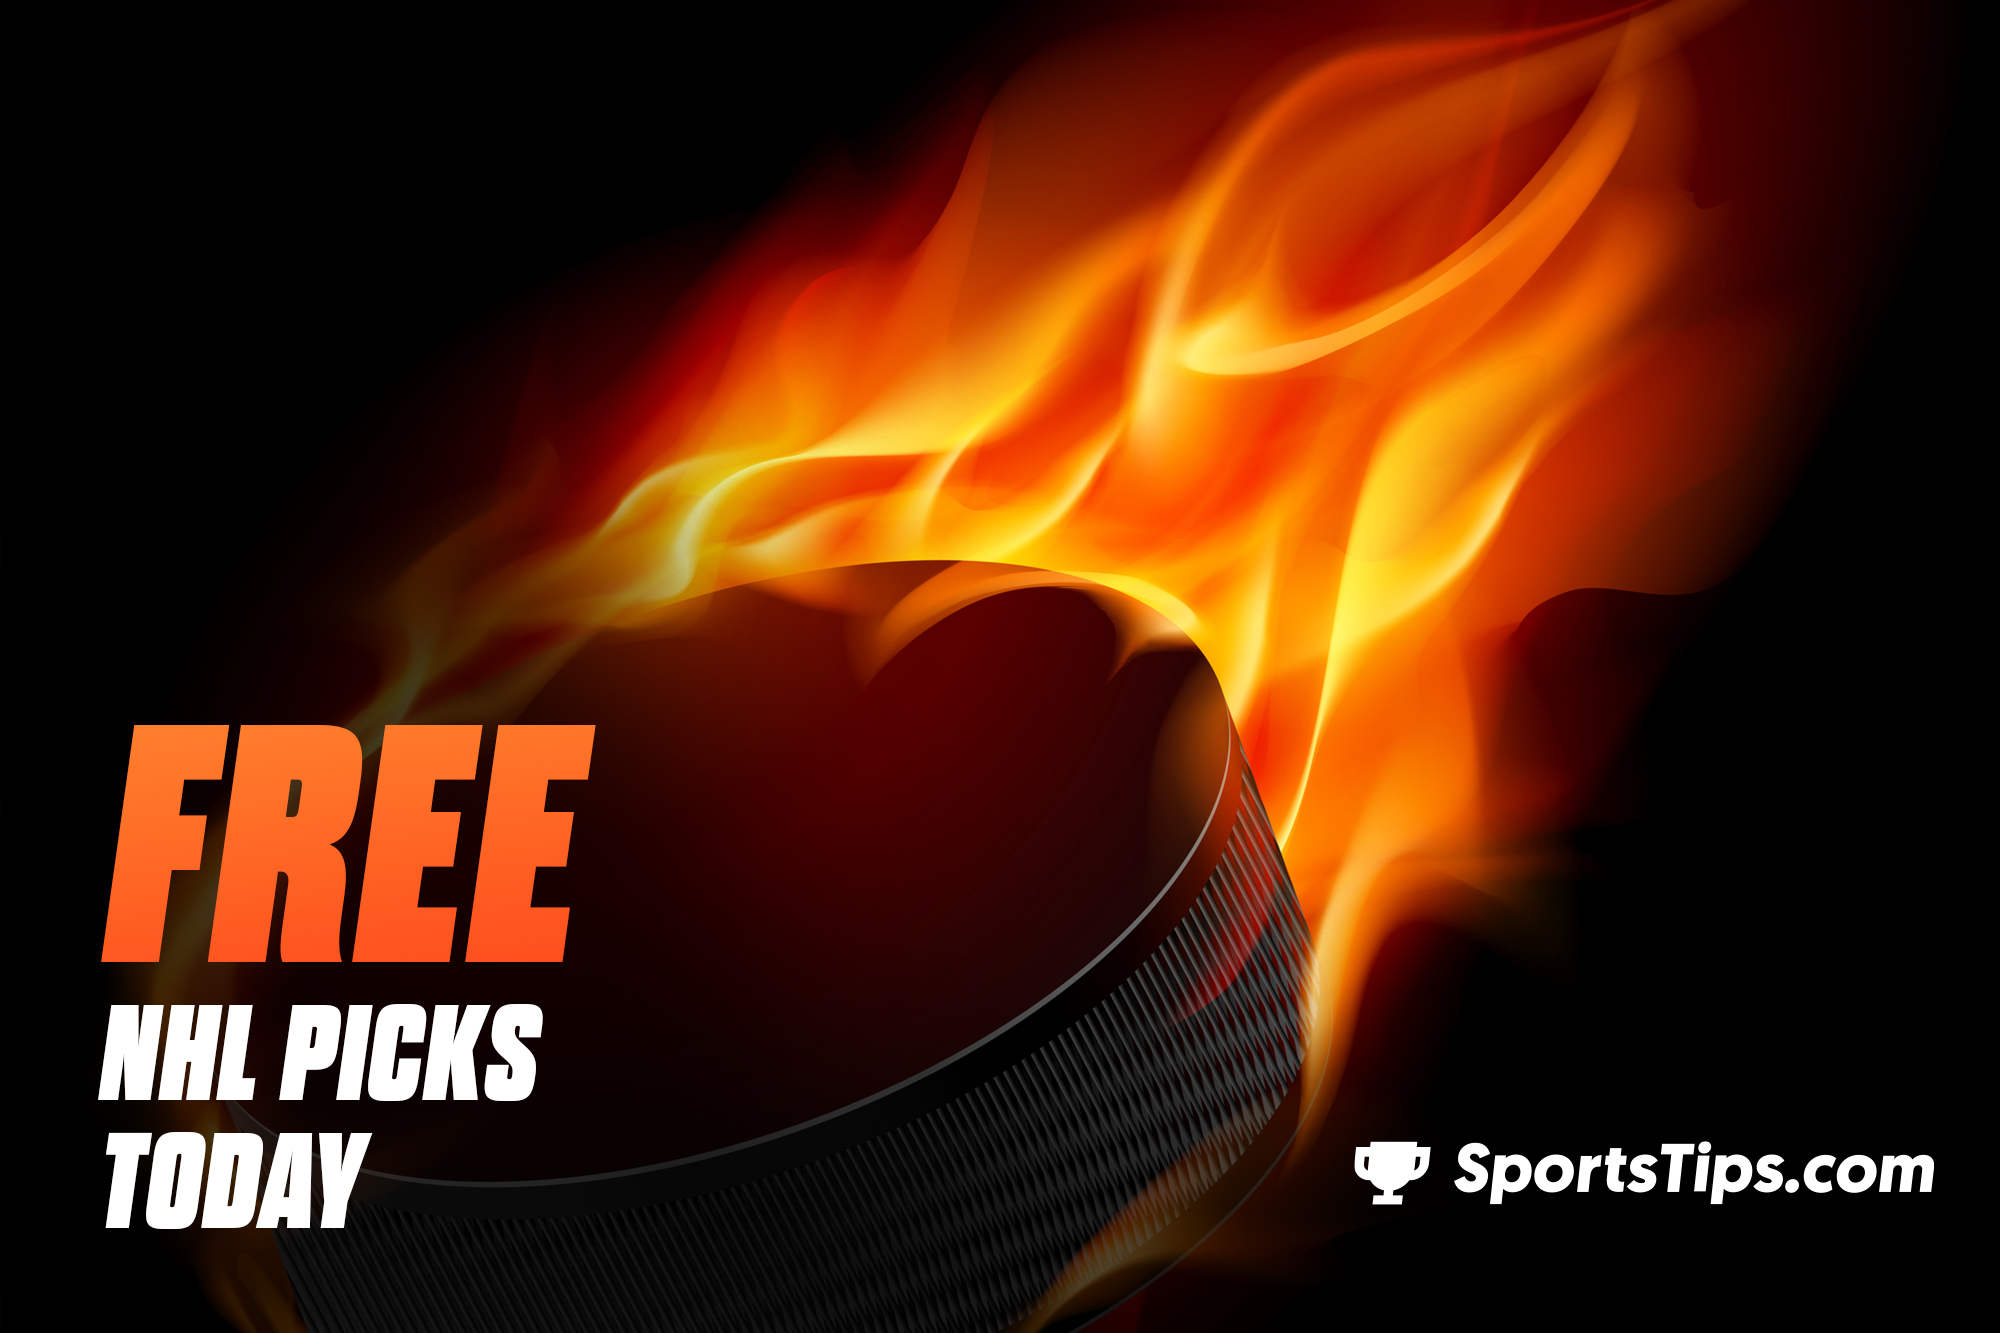 NHL Playoffs Semi Finals: Free NHL Picks Today for Wednesday, June 16th, 2021